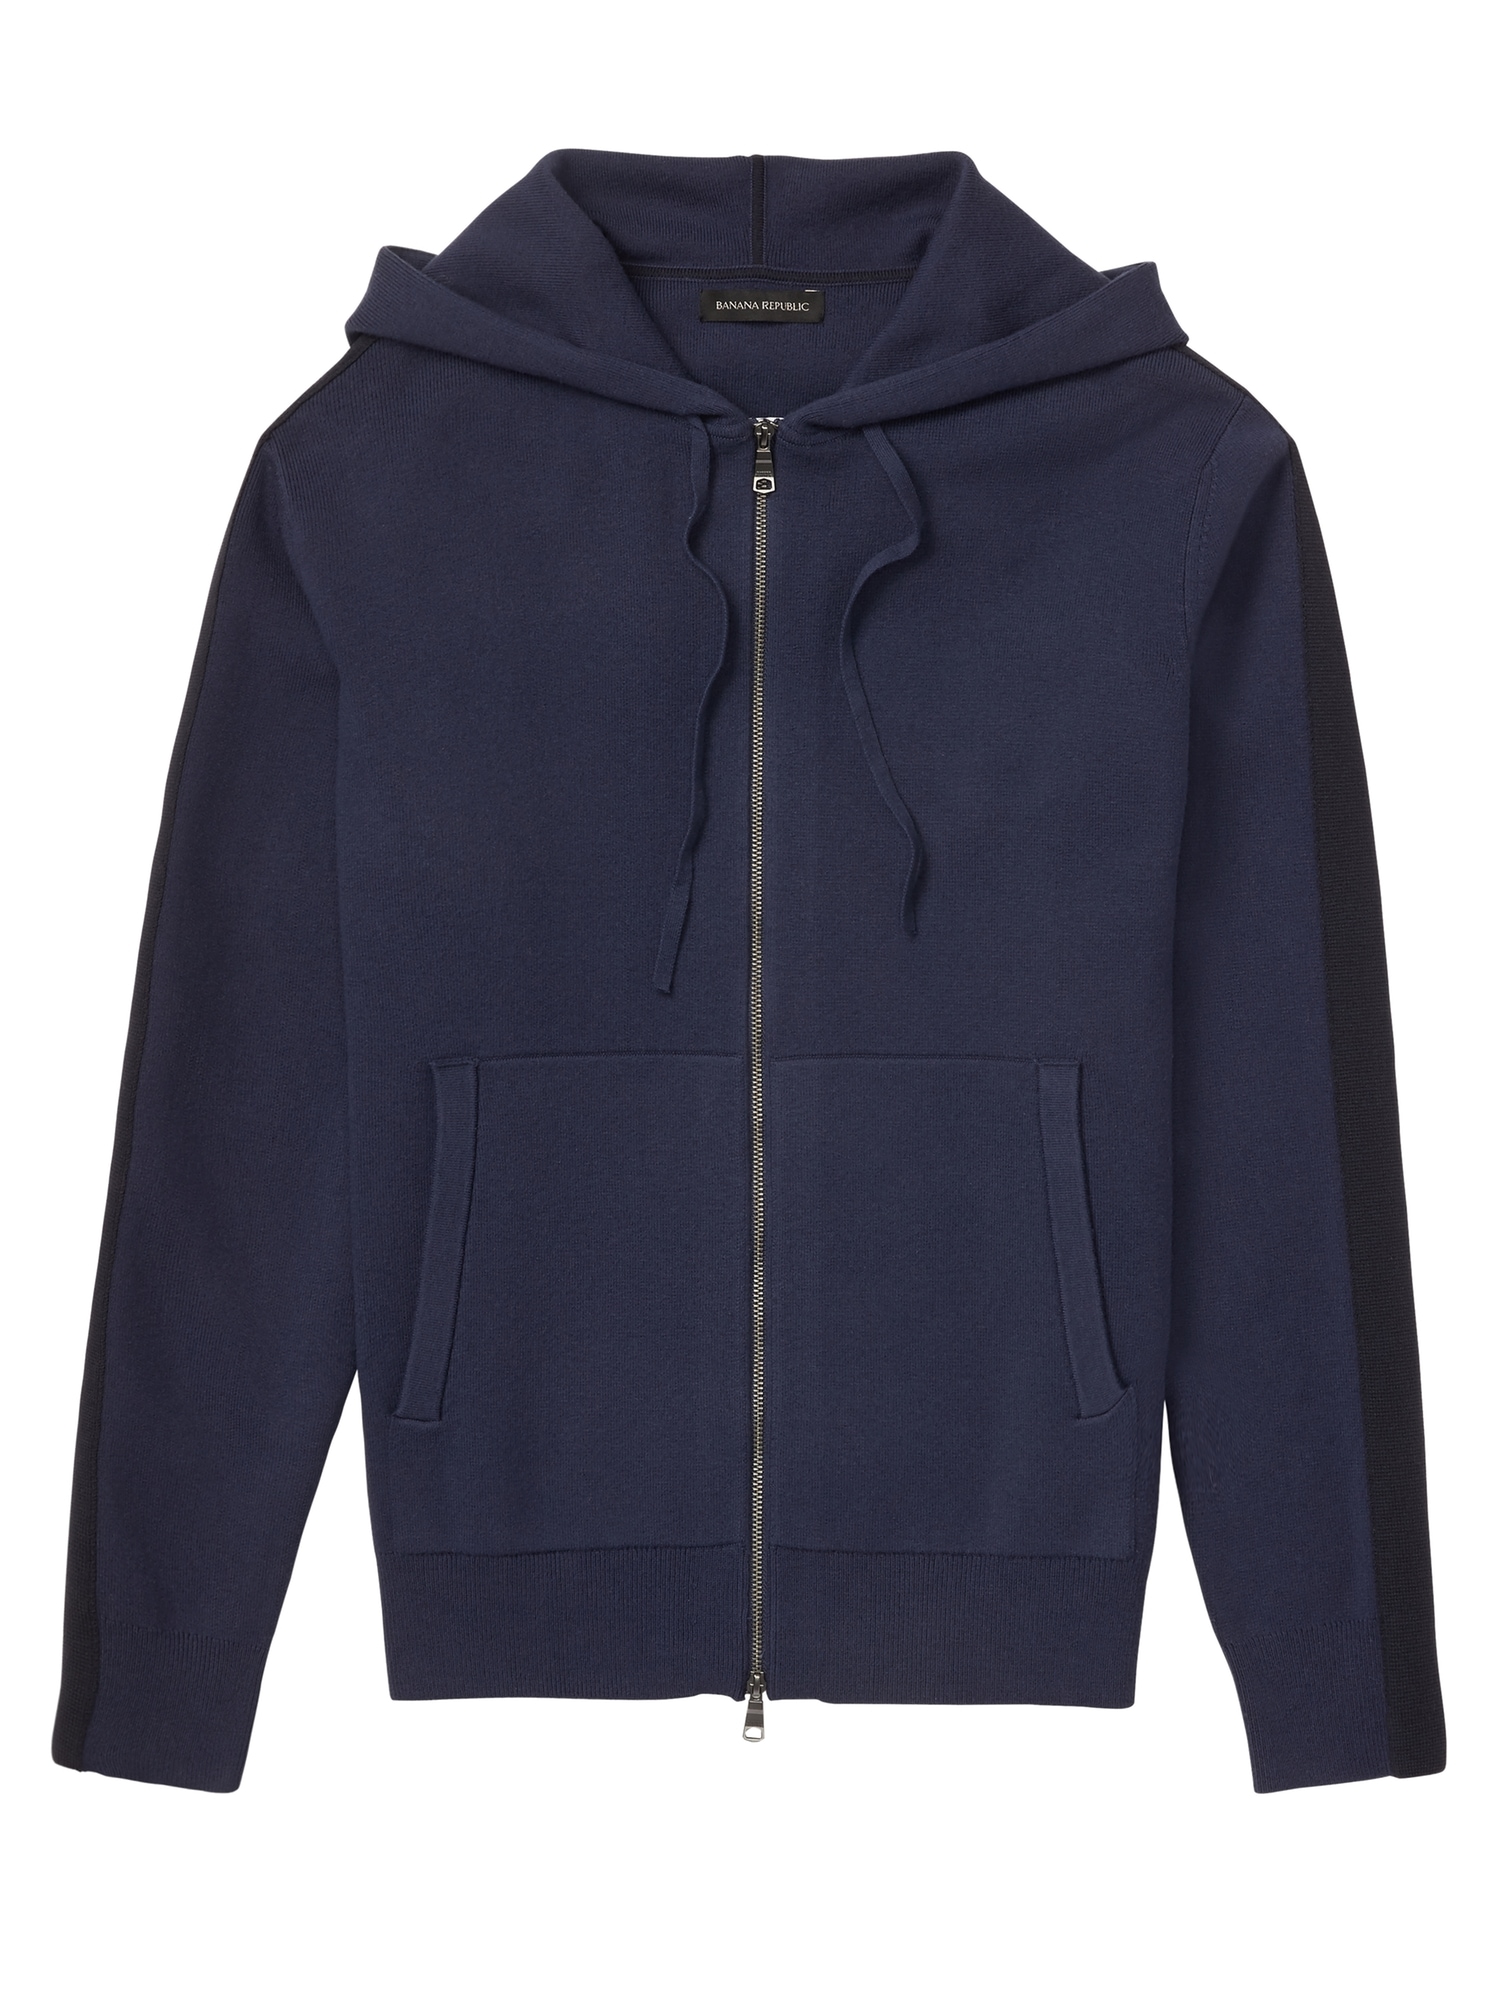 Full-Zip Sweater Hoodie with COOLMAX® Technology